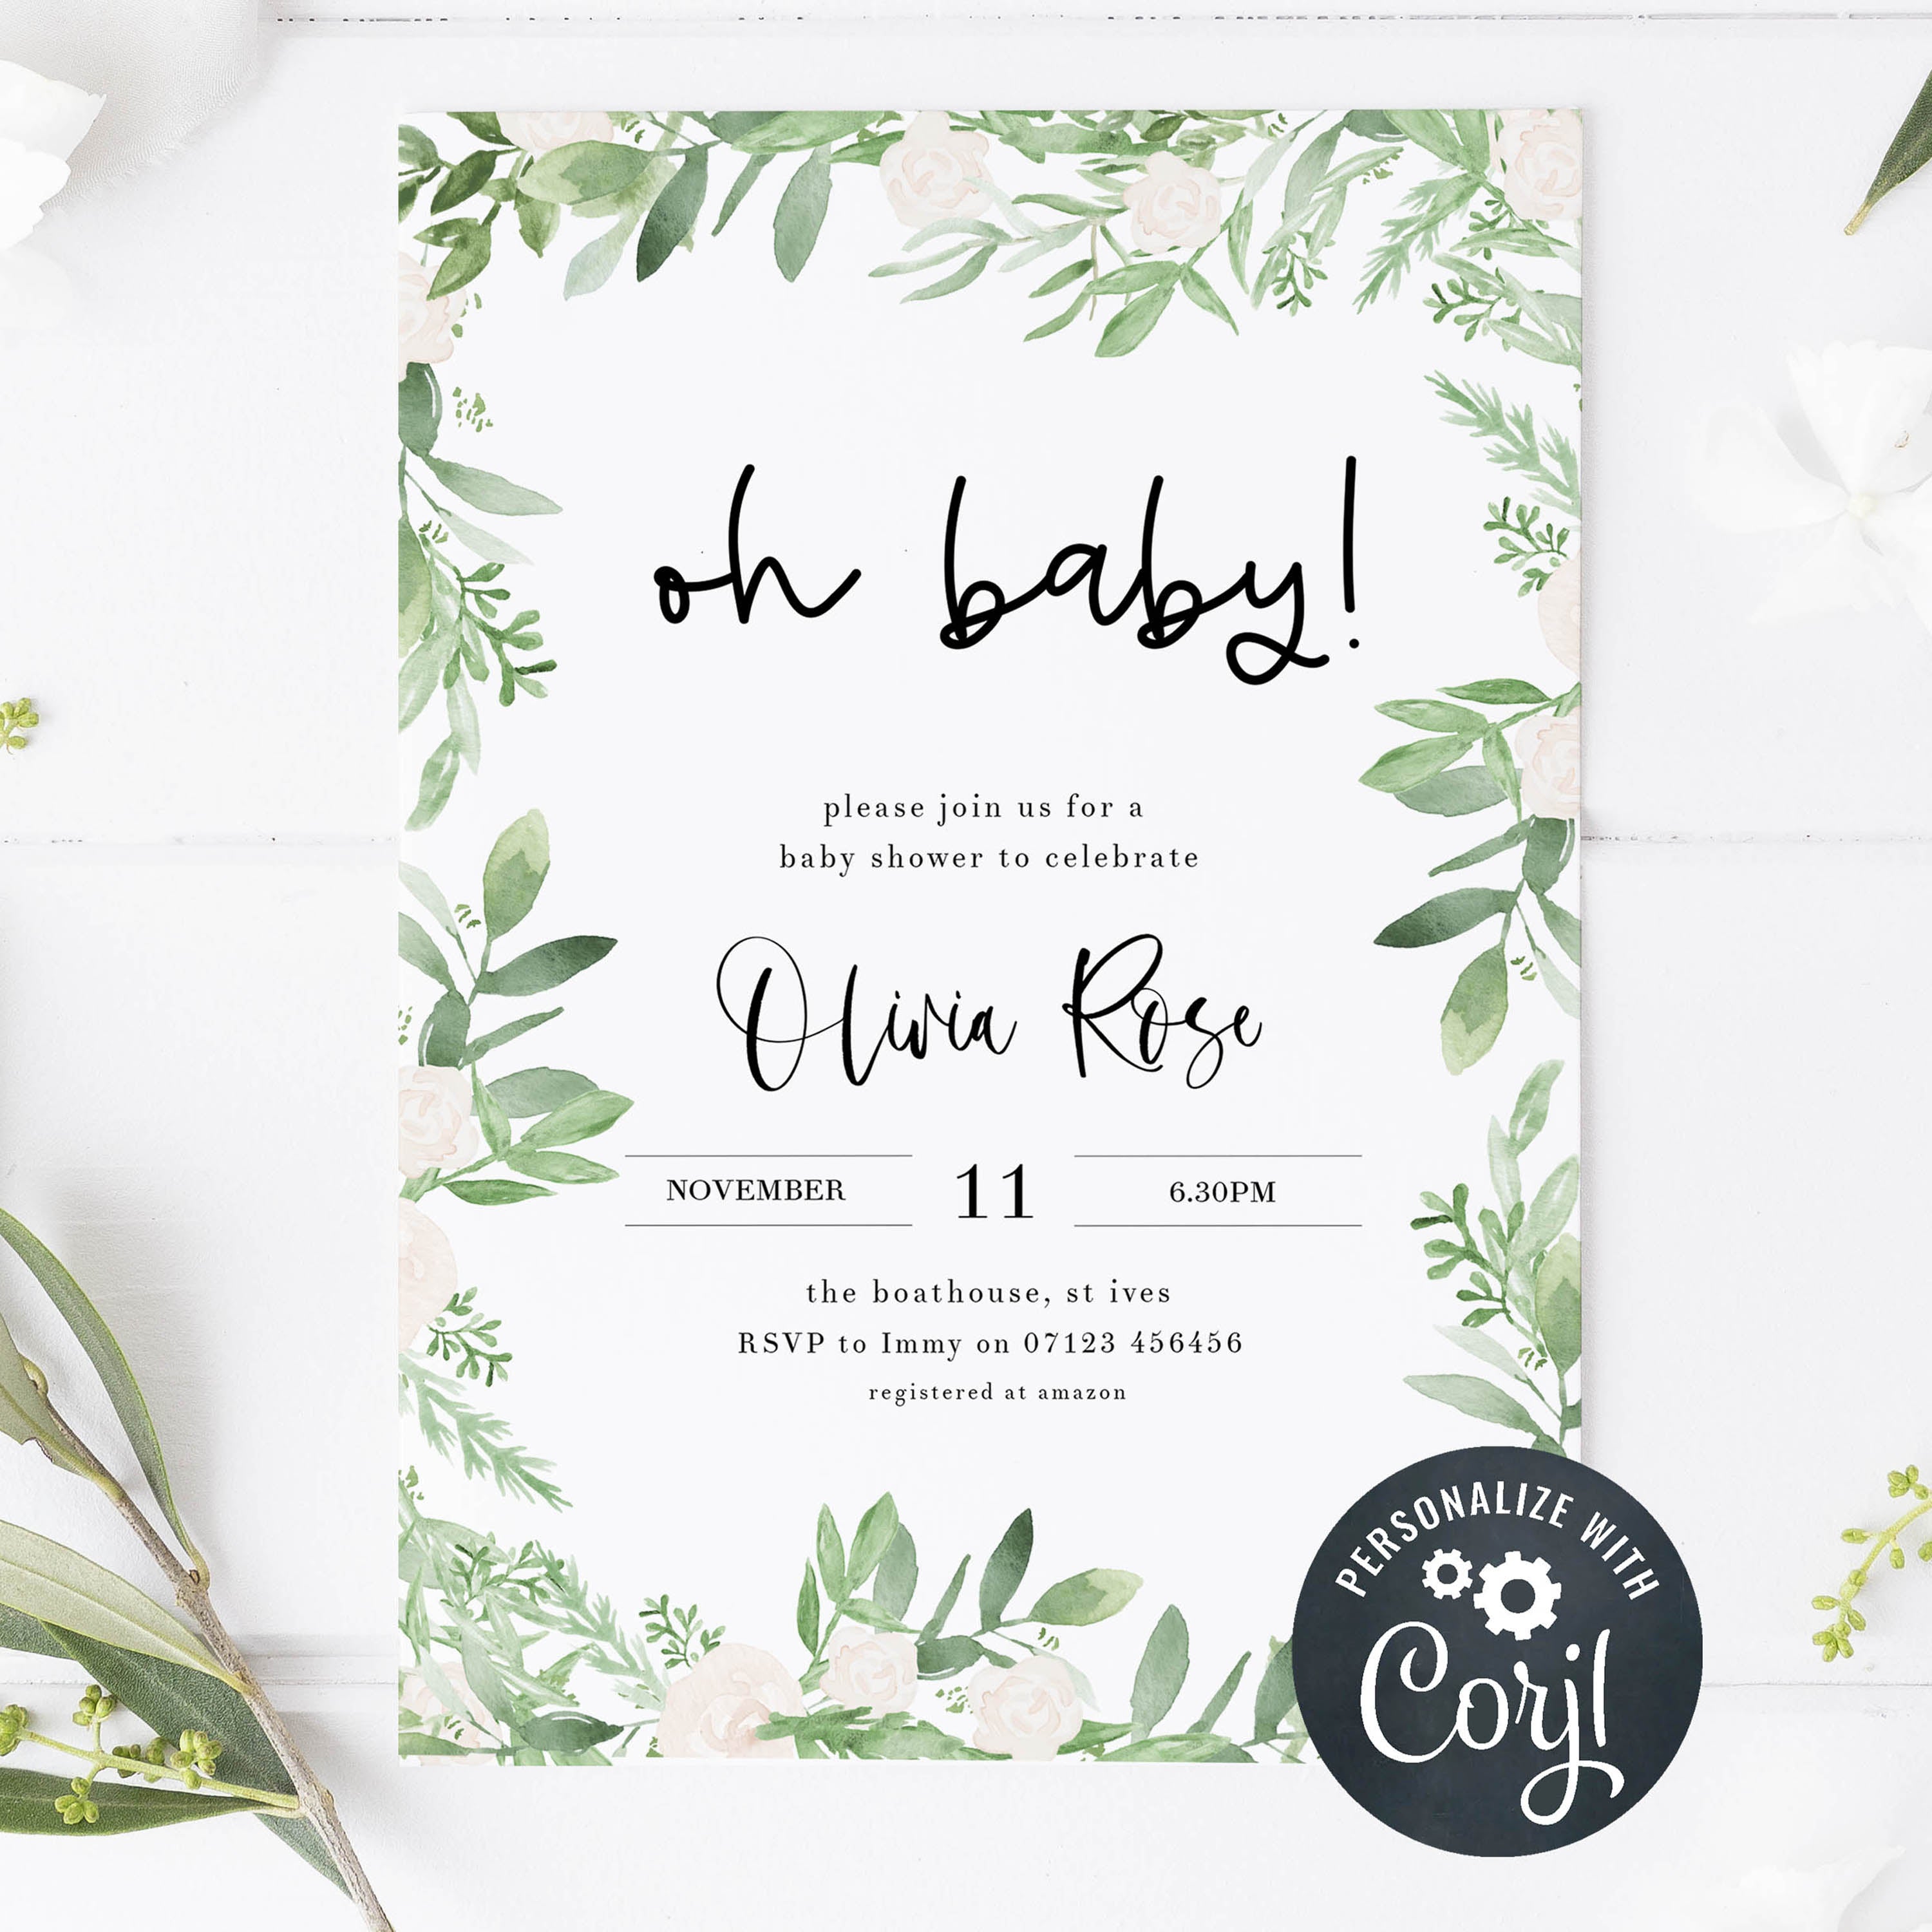 Oh baby baby shower invitation, Editable baby shower invitations, printable baby shower invitations, green leaf baby shower invitations, botanical baby shower invitations, floral baby shower ideas, floral baby shower theme